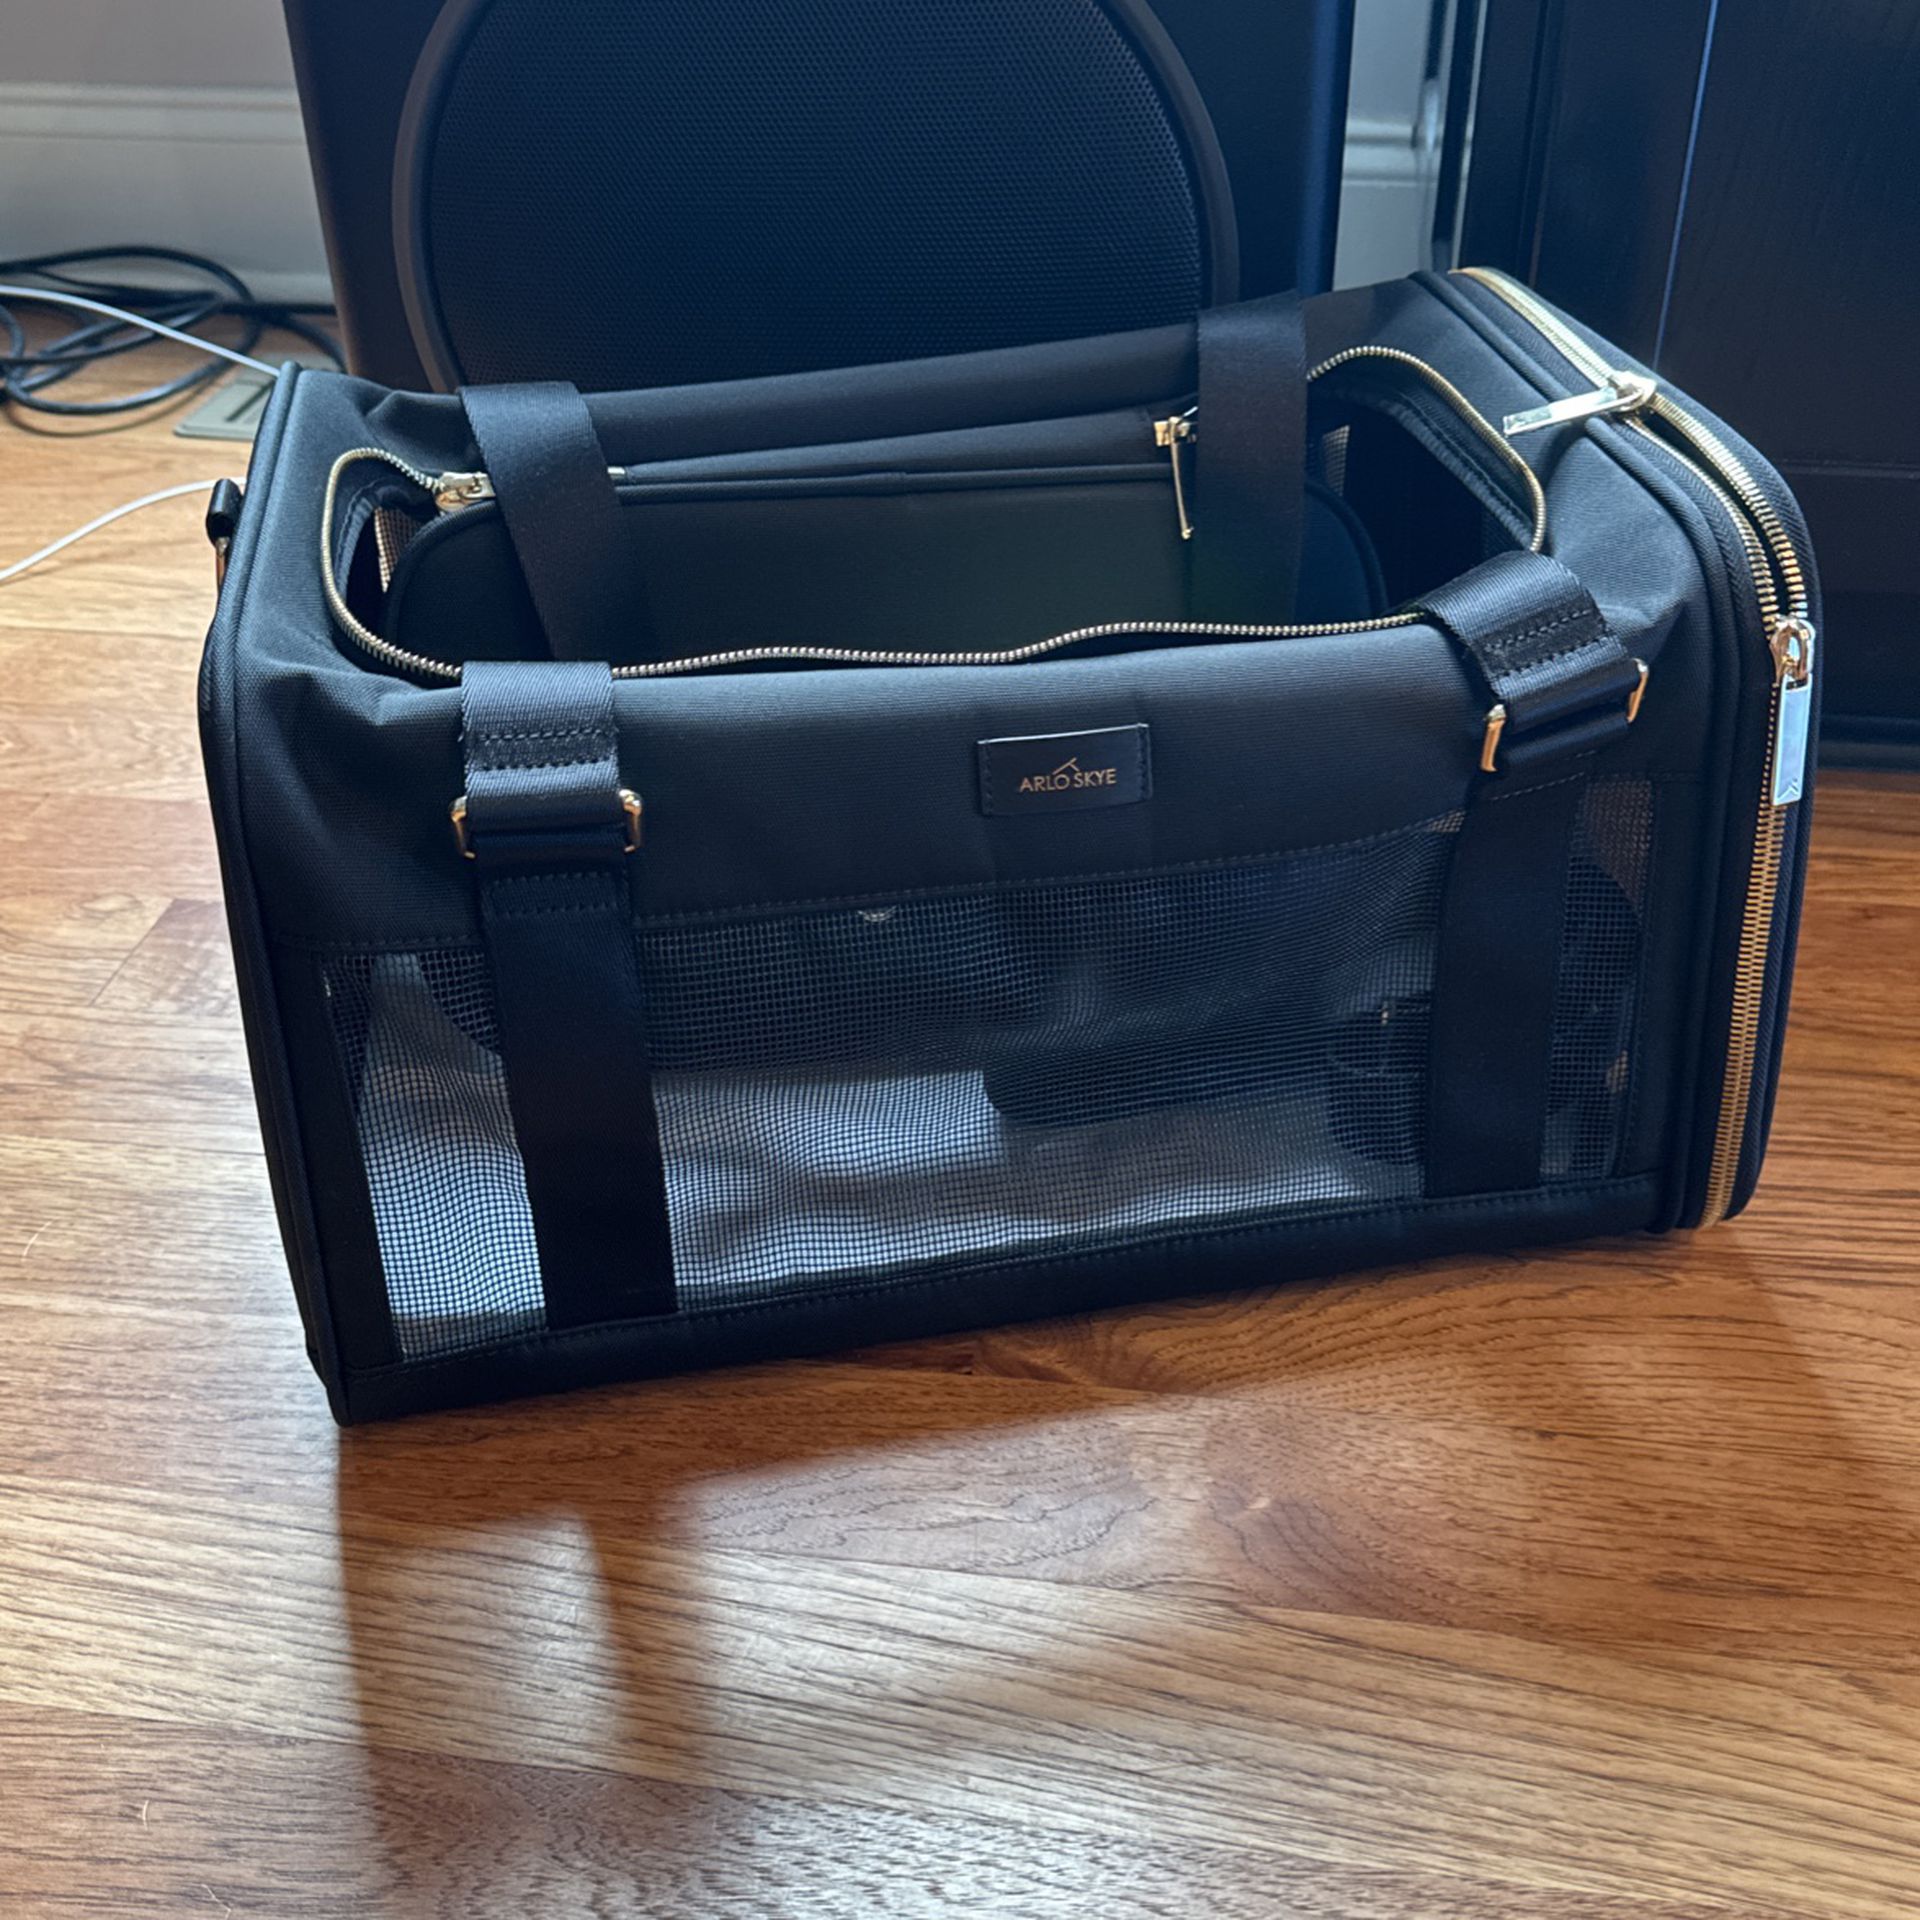 ArloSkye Large Dog Carrier—Only Used Once! 